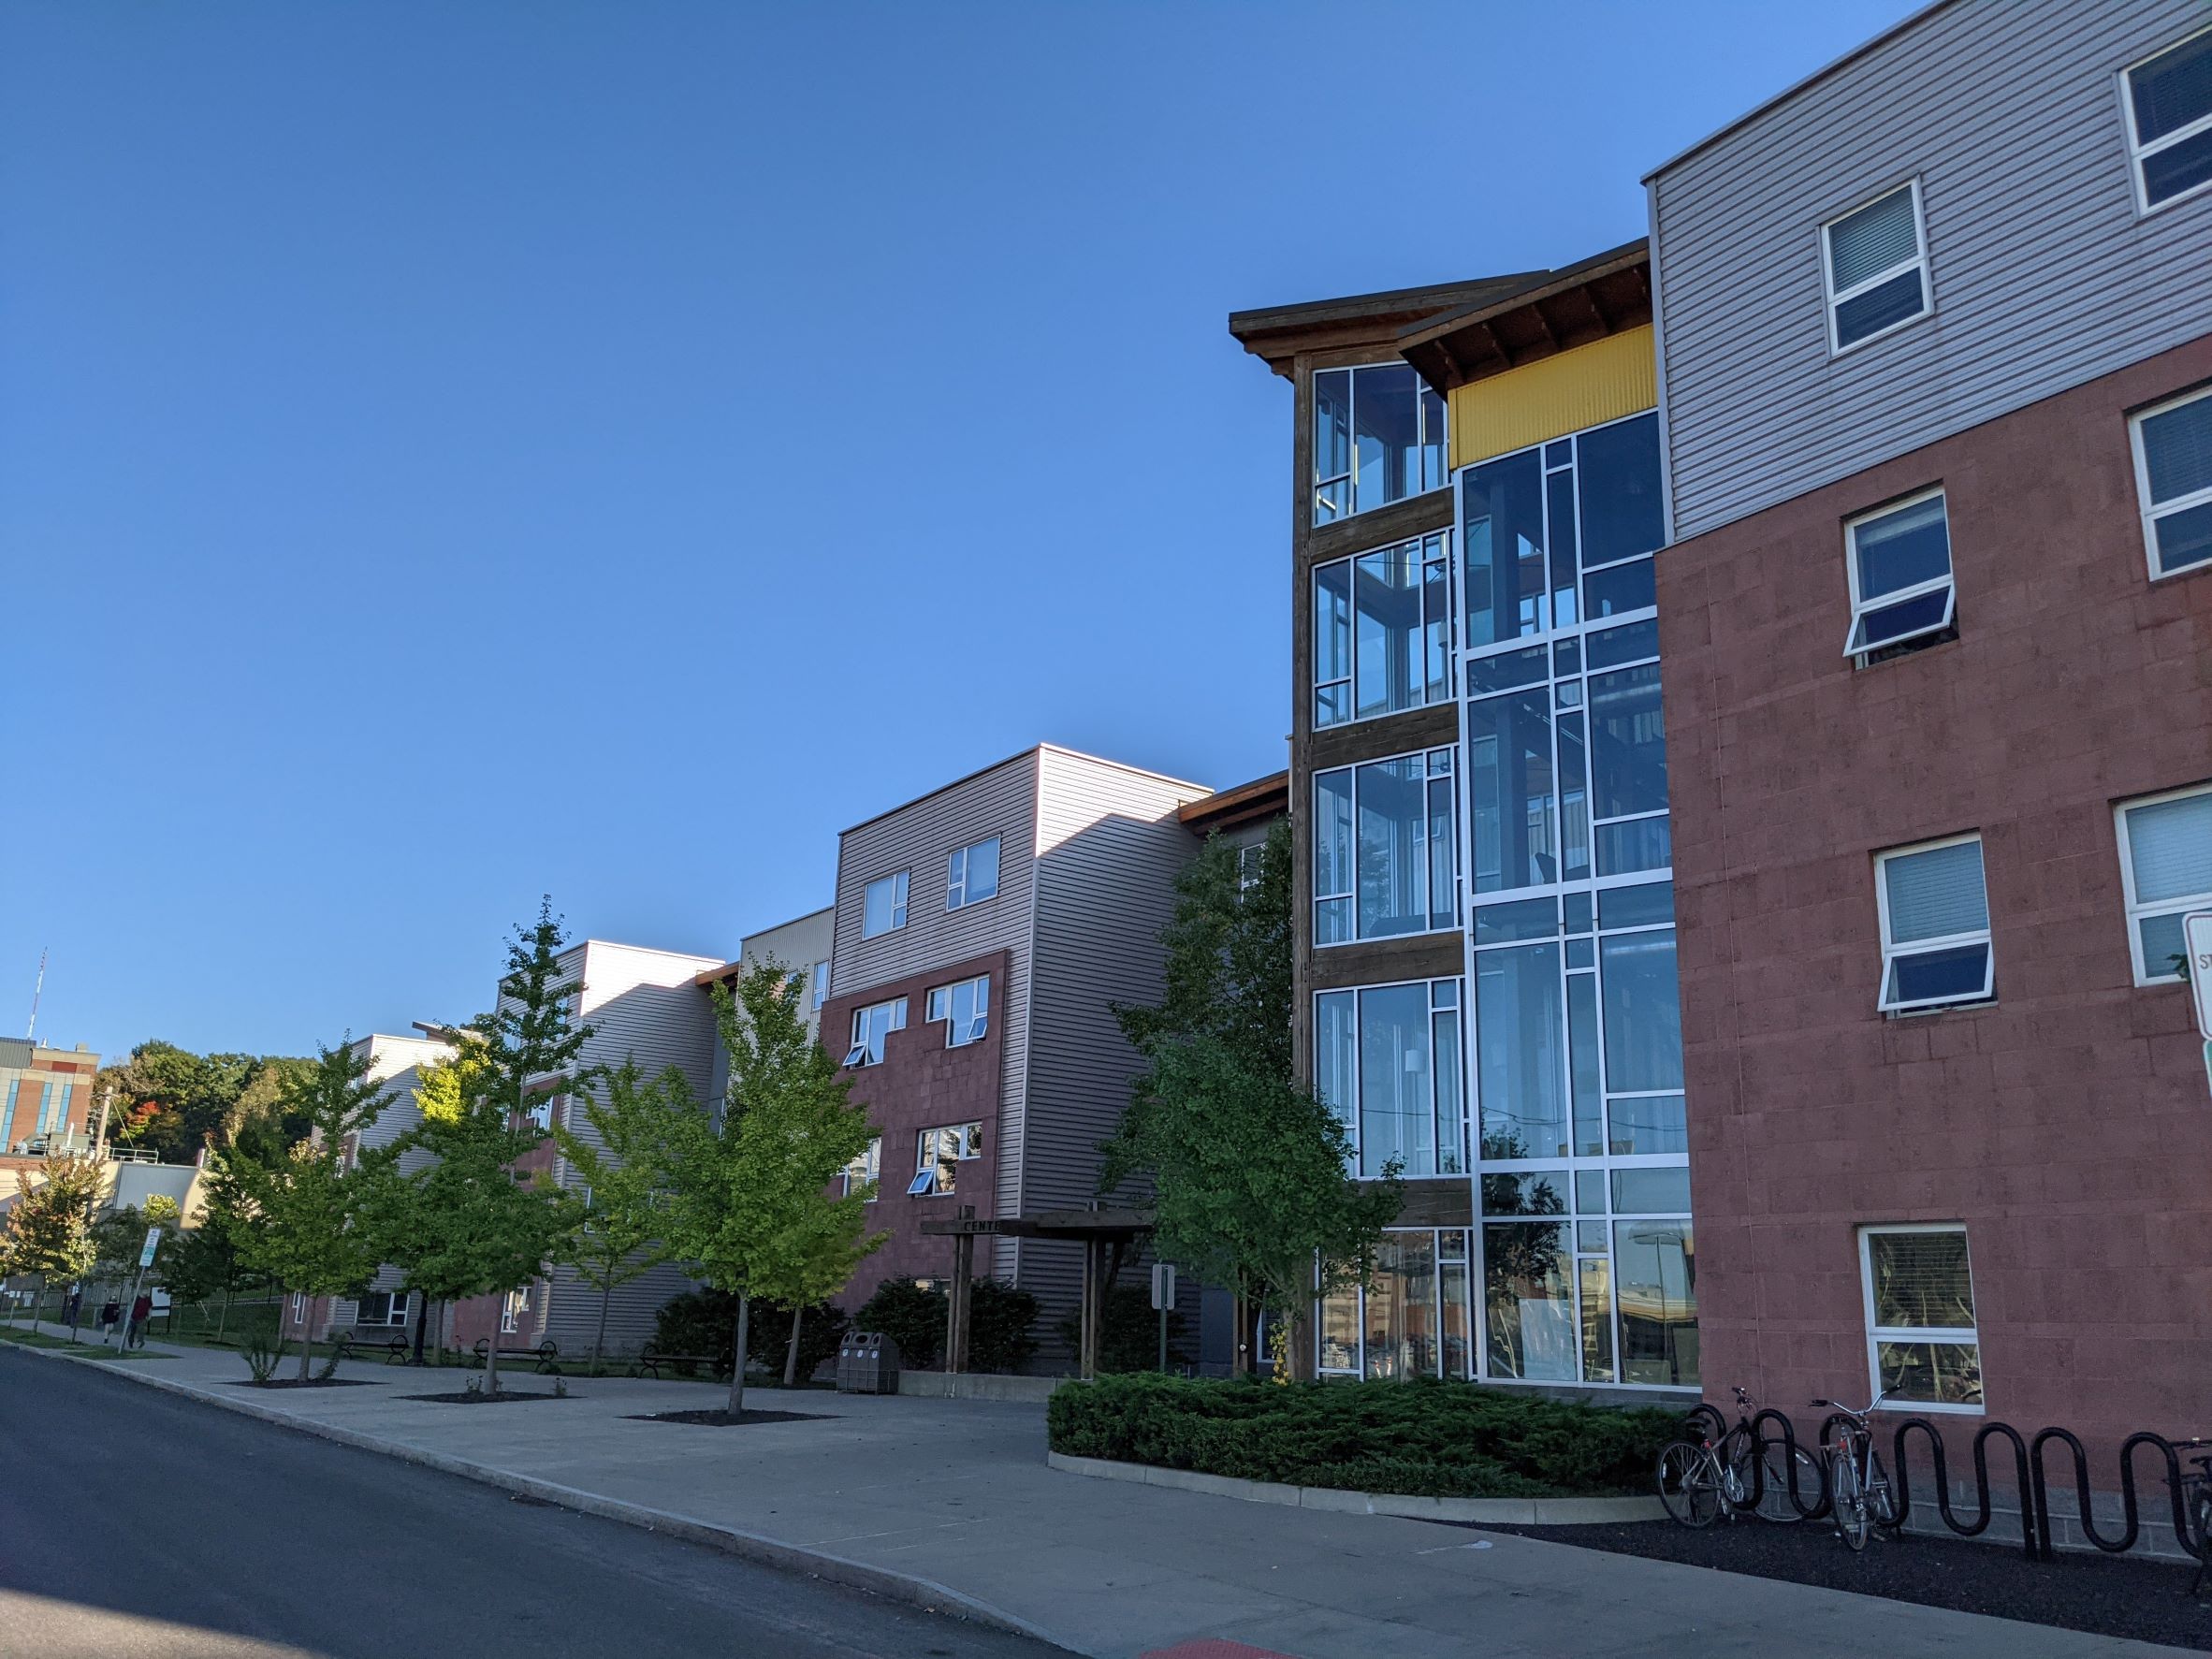 Close up of main entry to student housing building with bright yellow metal panel surrounding glass lounge next to a wood tower that looks like a forest ranger watchtower, surrounded by separate looking brick and metal buildings